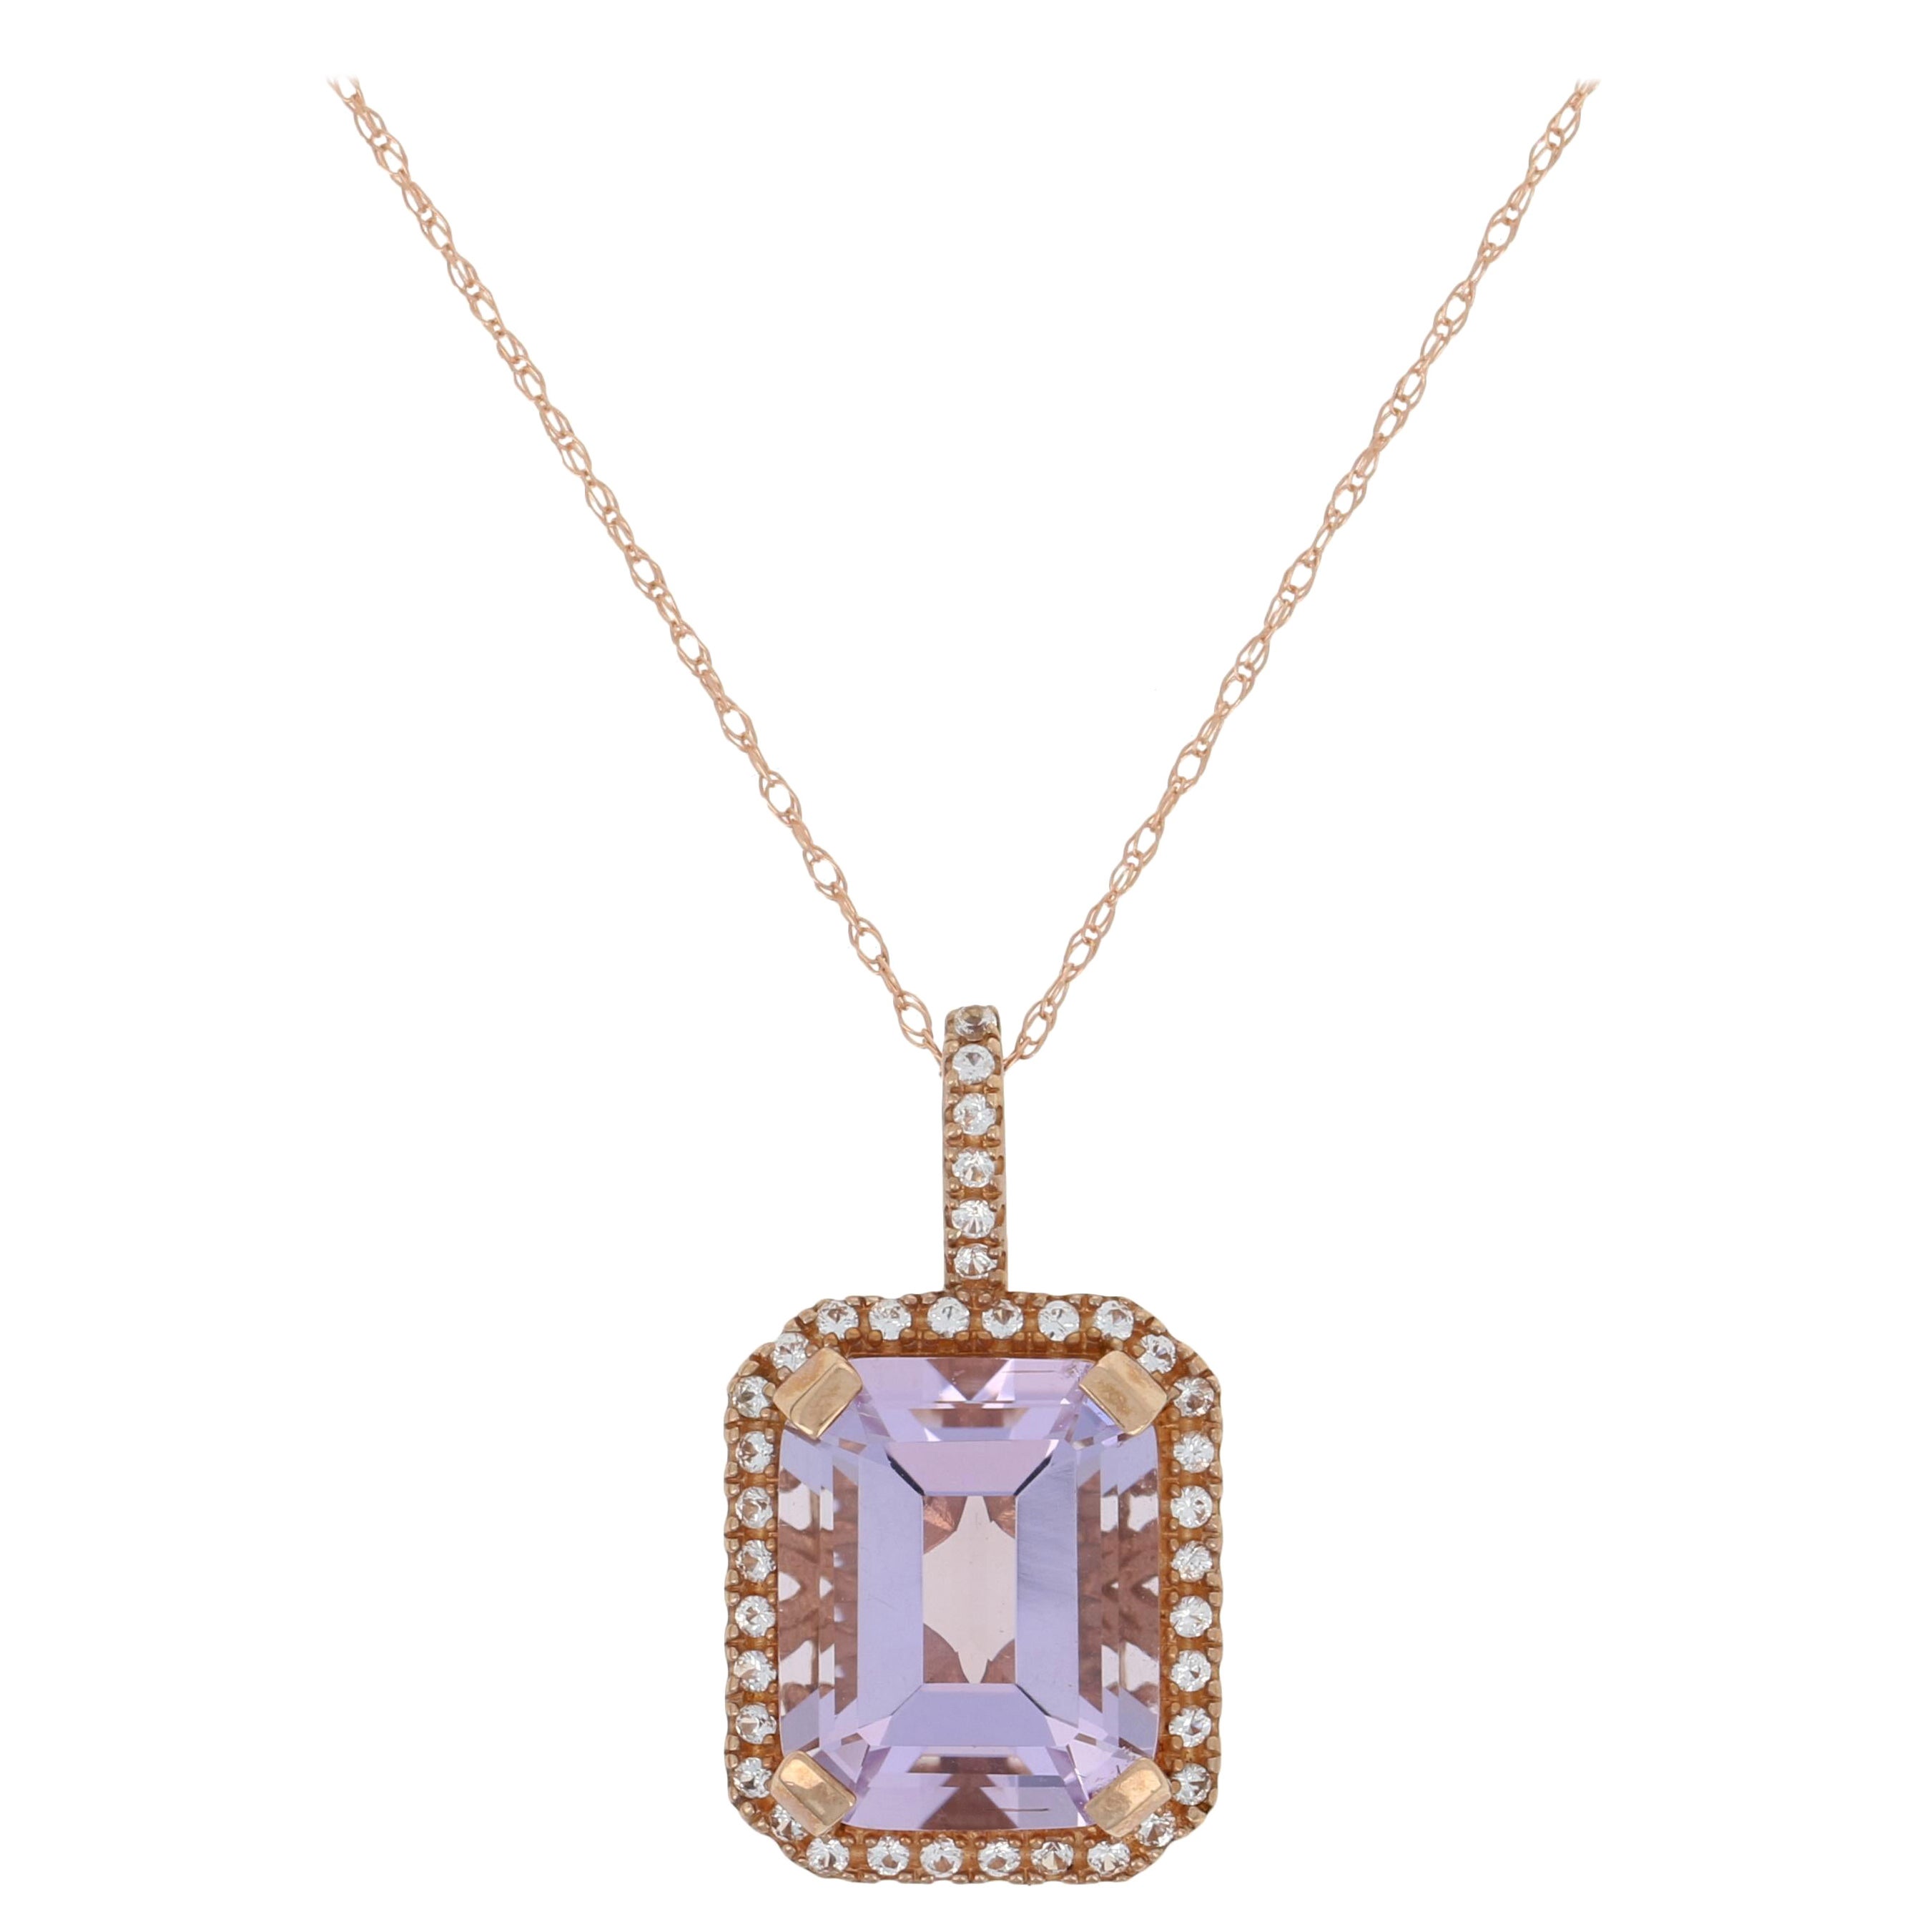 New 4.90ctw Amethyst & White Topaz Pendant Necklace, 10k Rose Gold Halo For Sale